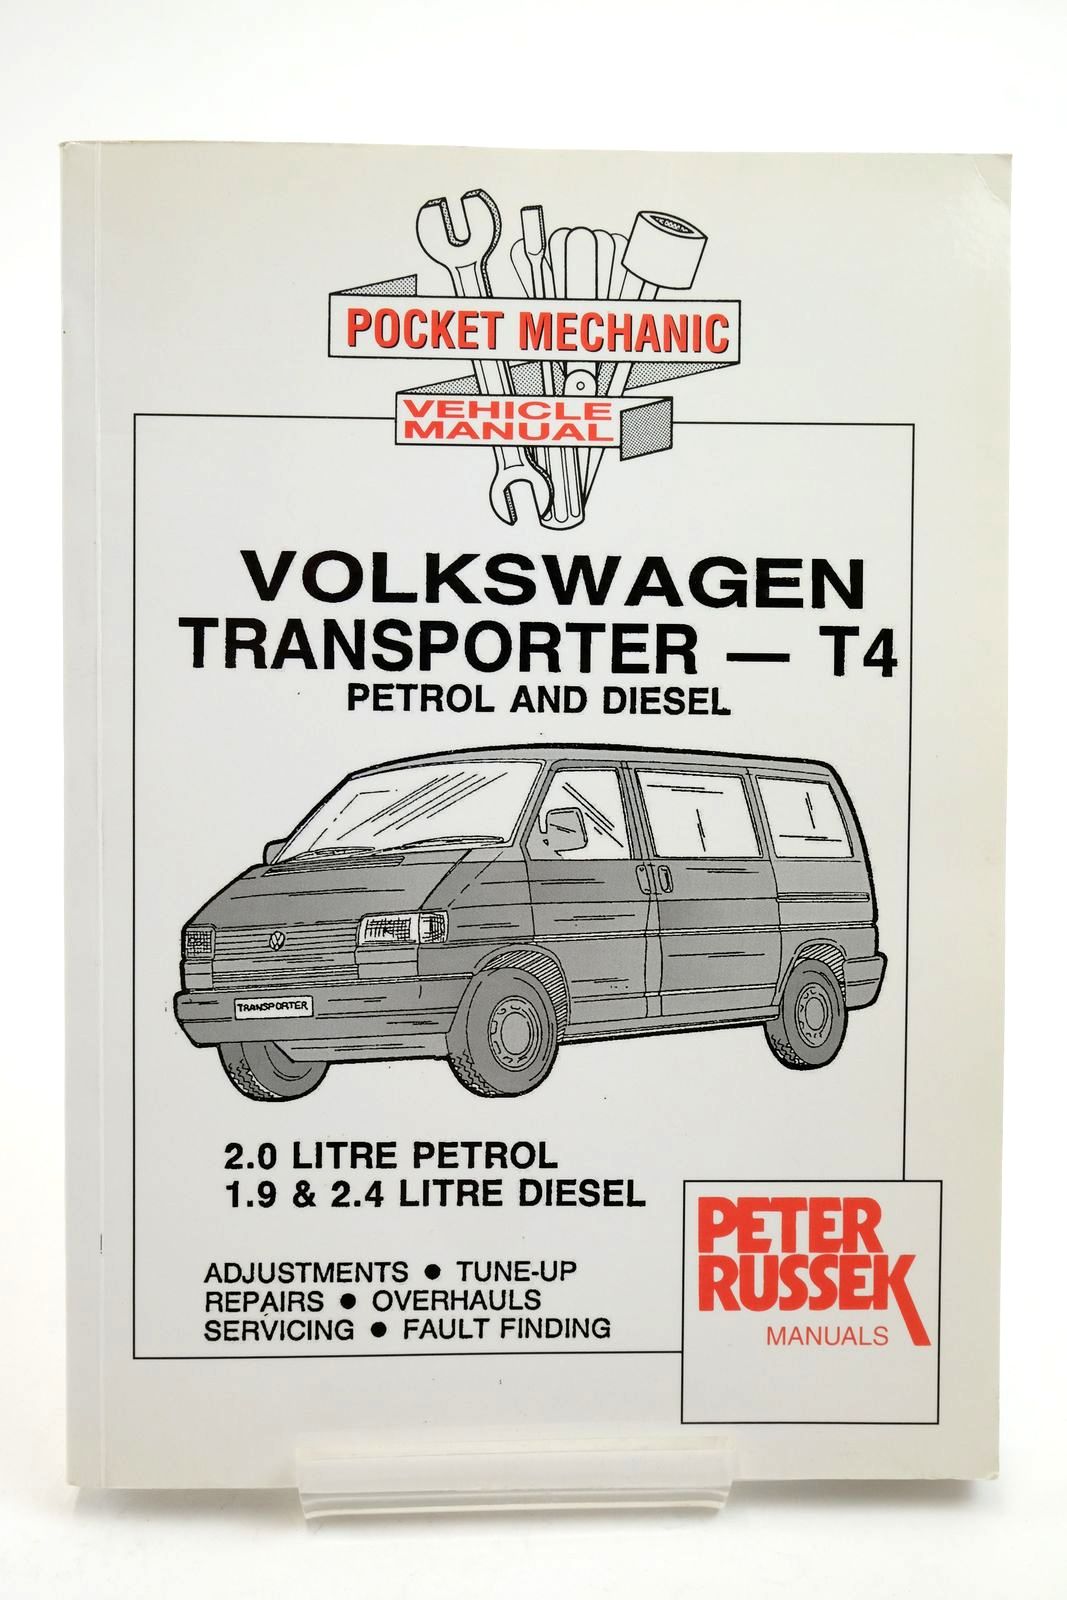 Photo of VOLKSWAGEN TRANSPORTER - T4 PETROL AND DIESEL published by Peter Russek Publications Ltd (STOCK CODE: 2138828)  for sale by Stella & Rose's Books